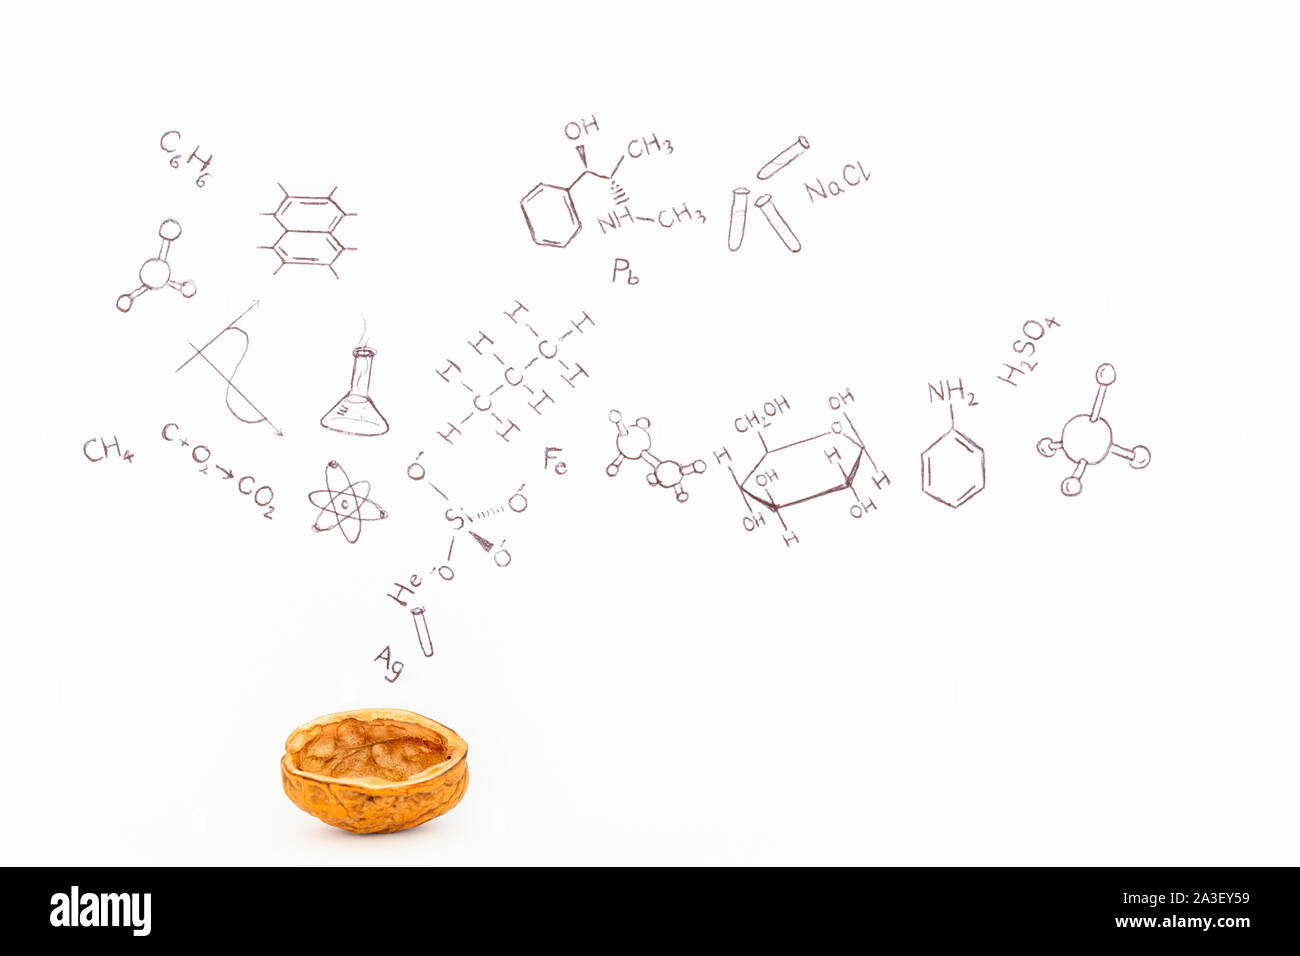 Concept of the phrase chemistry in a nutshell. Chemical formulas and symbols drawn on white paper with walnuts Stock Photo